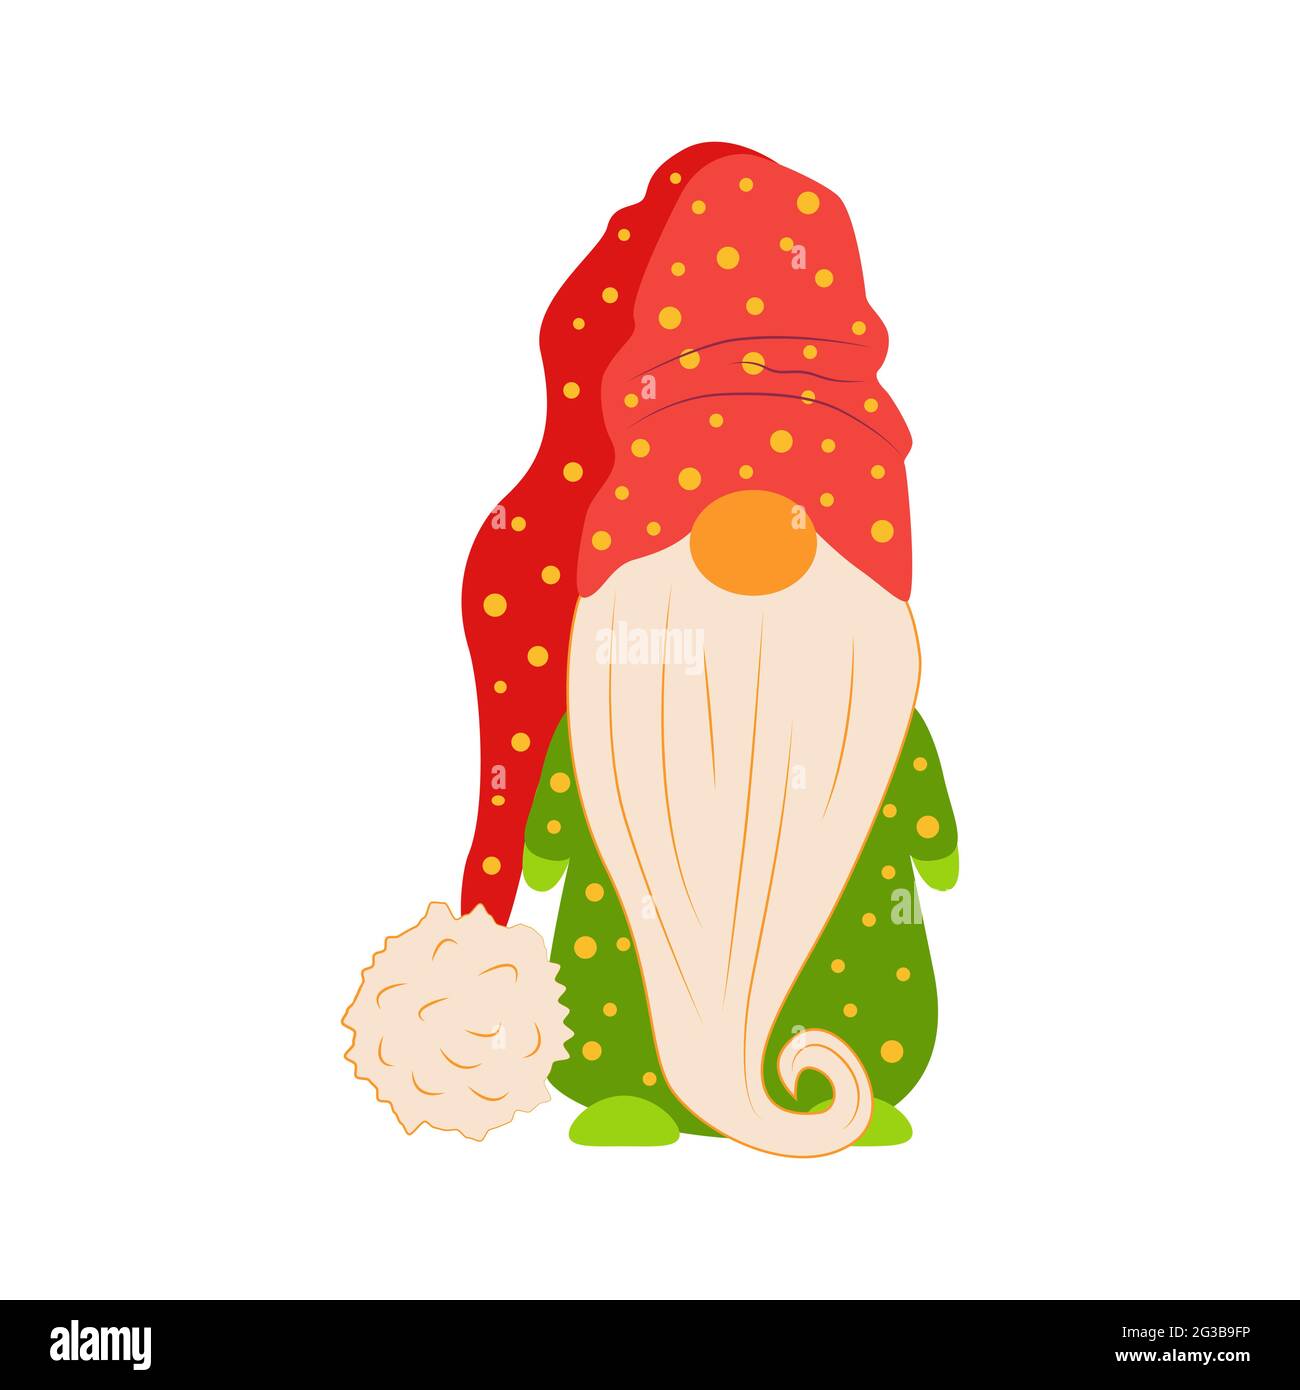 Cute Cartoon Gnome isolated on a white background. Christmas Cute Gnomes with Red Caps in Flat Style. Dwarfs Design Template for Merry Christmas and H Stock Vector